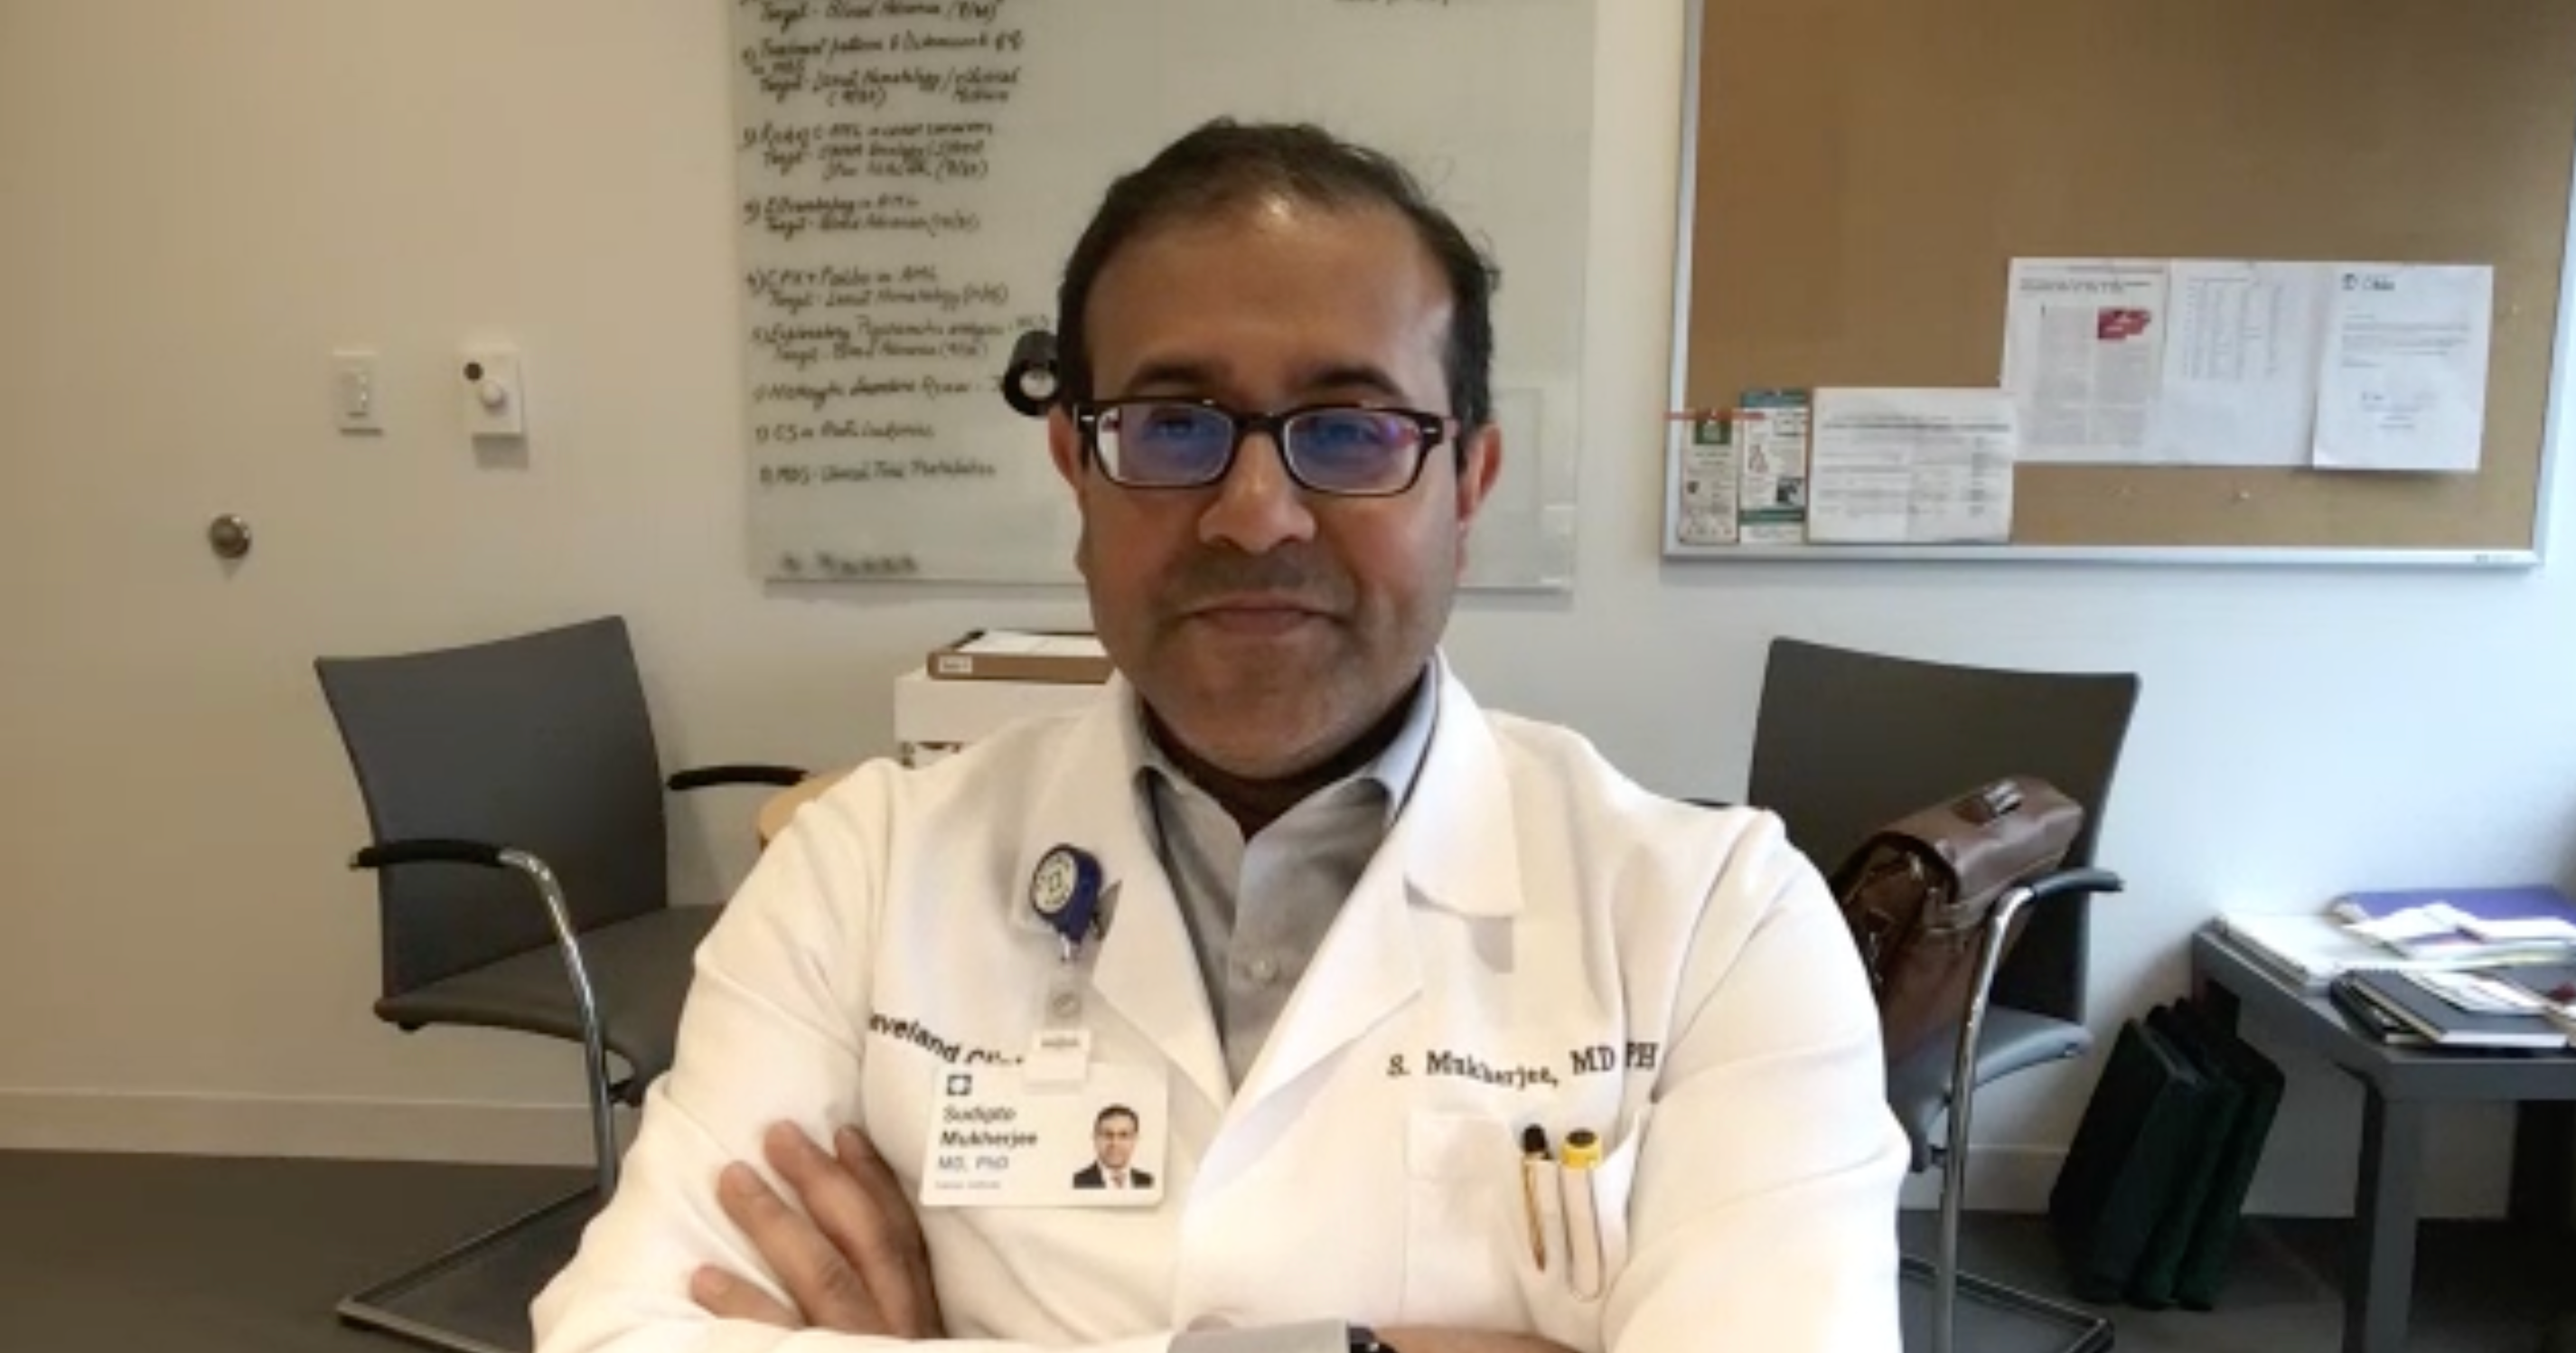 Sudipto Mukherjee, MD, PhD, MPH, hematology and medical oncology, Cleveland Clinic